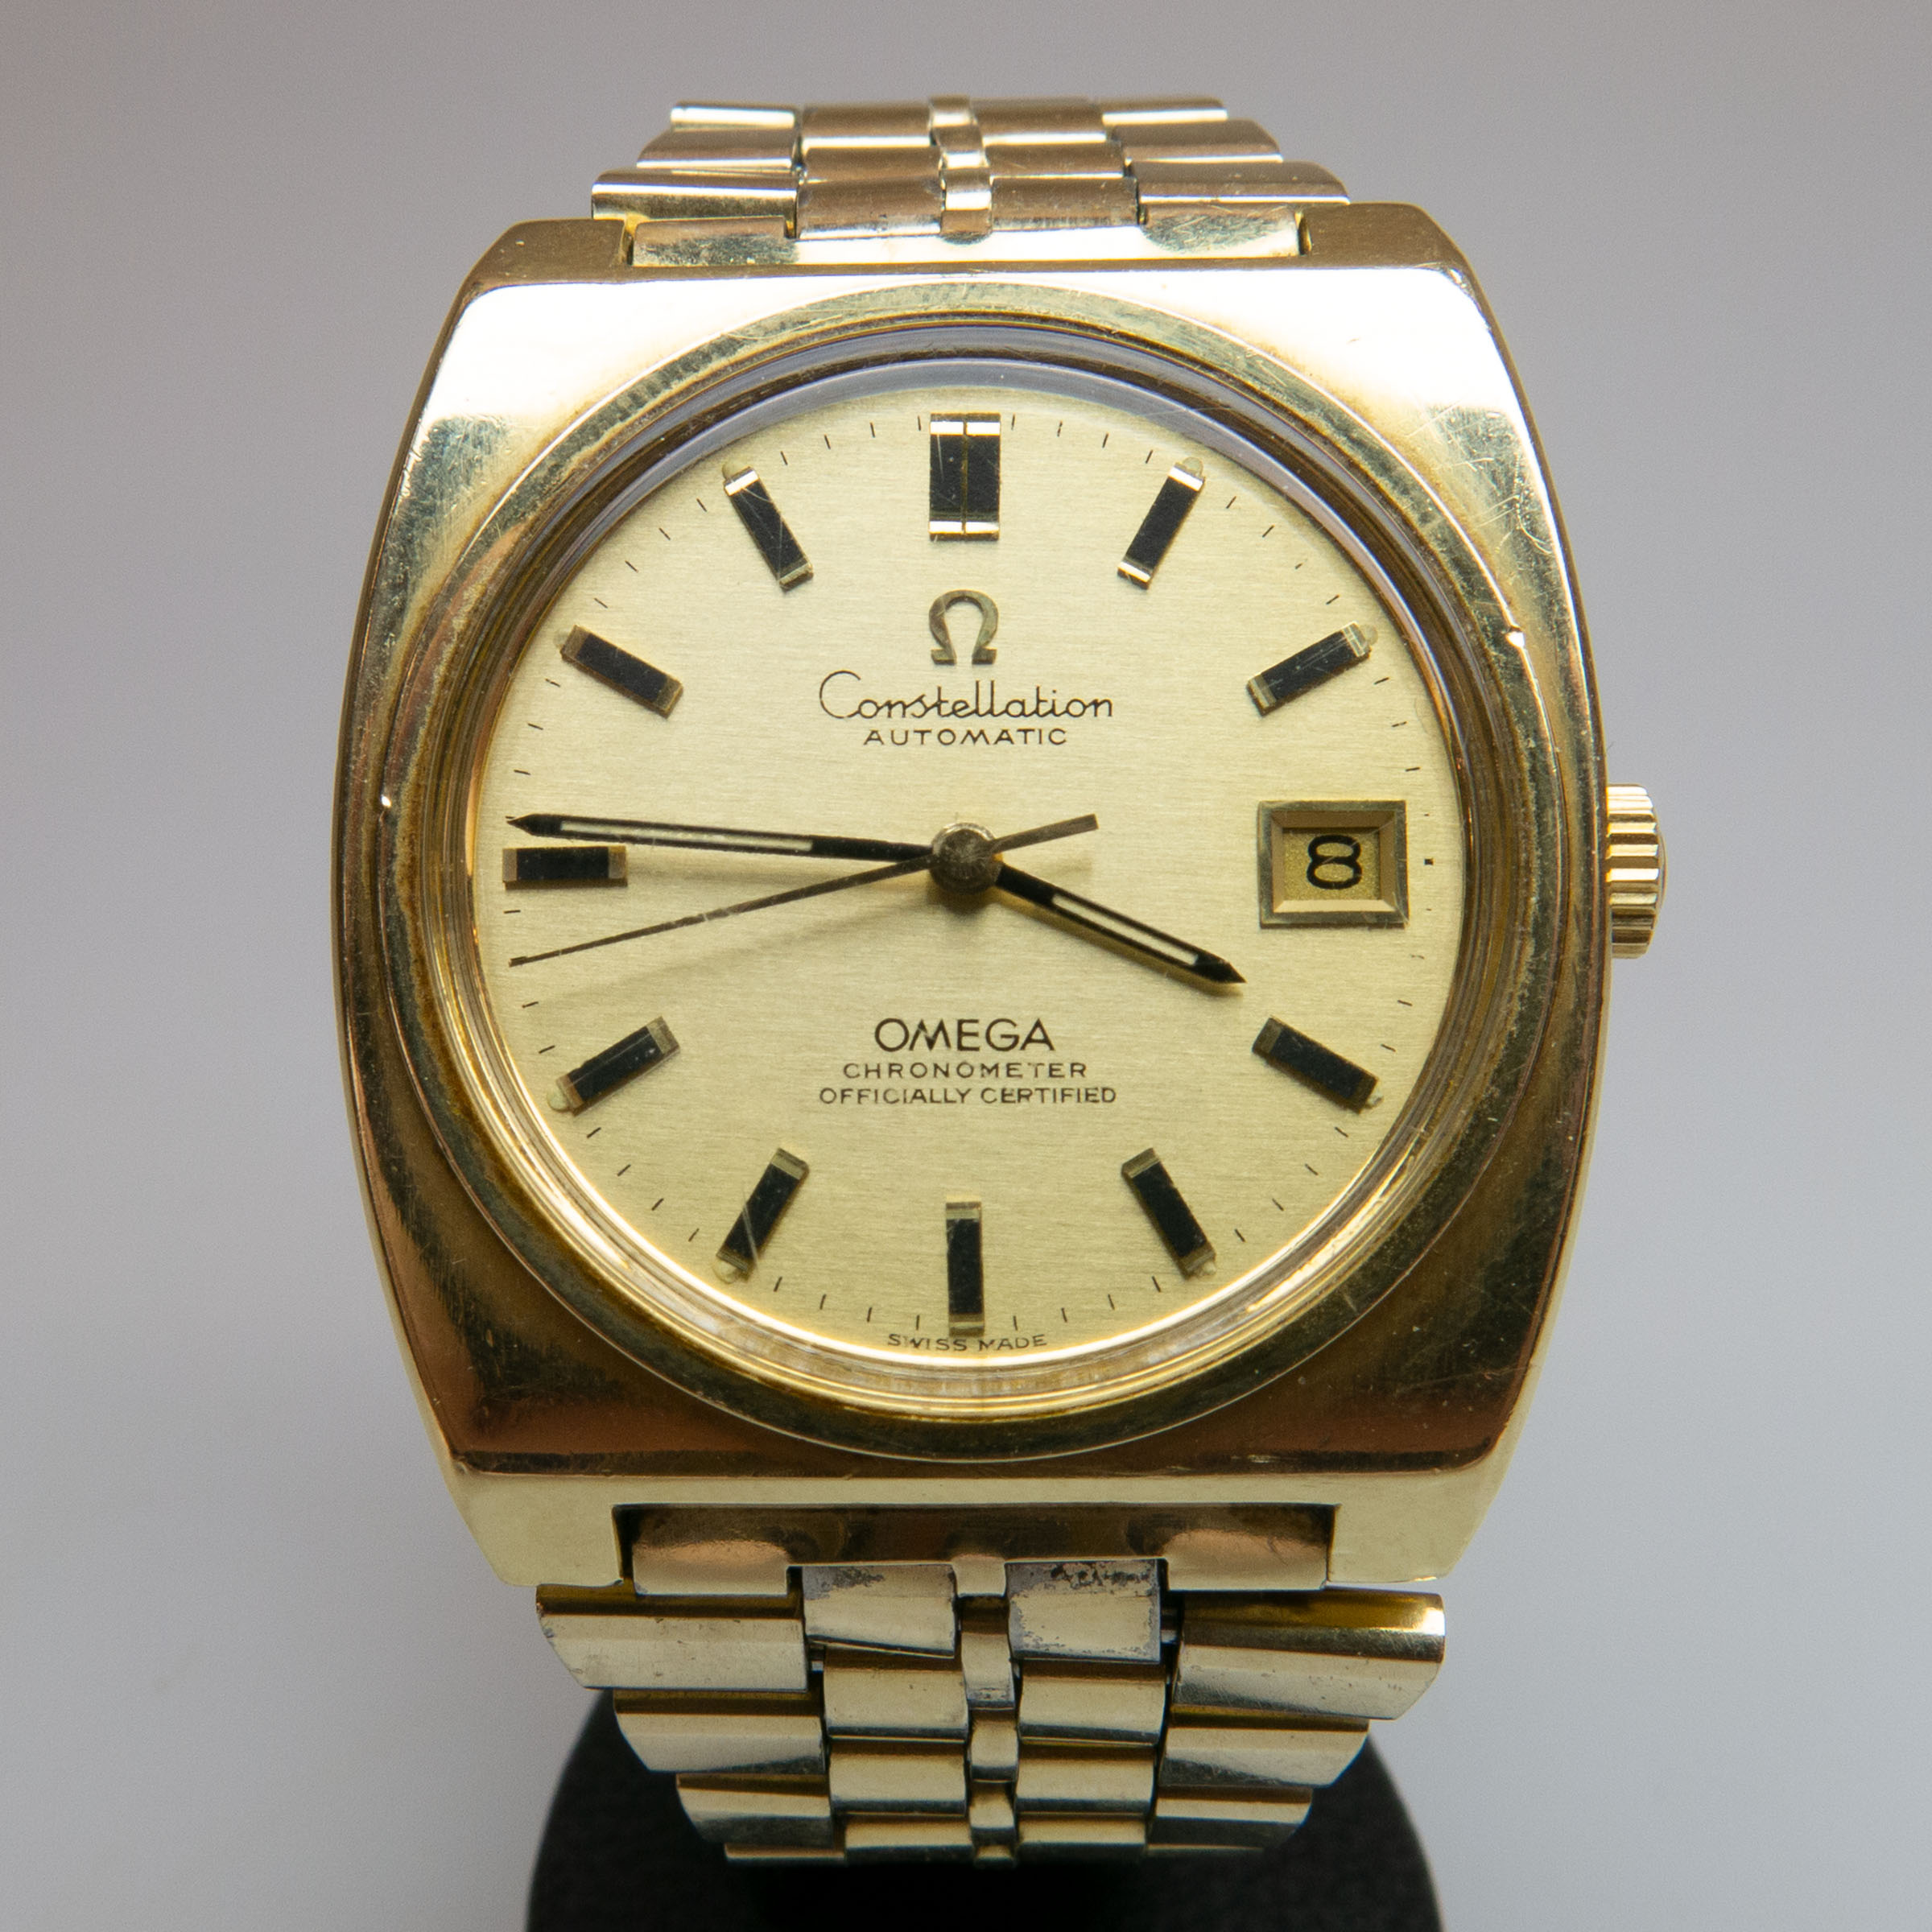 Omega Constellation Chronometer Wristwatch With Date